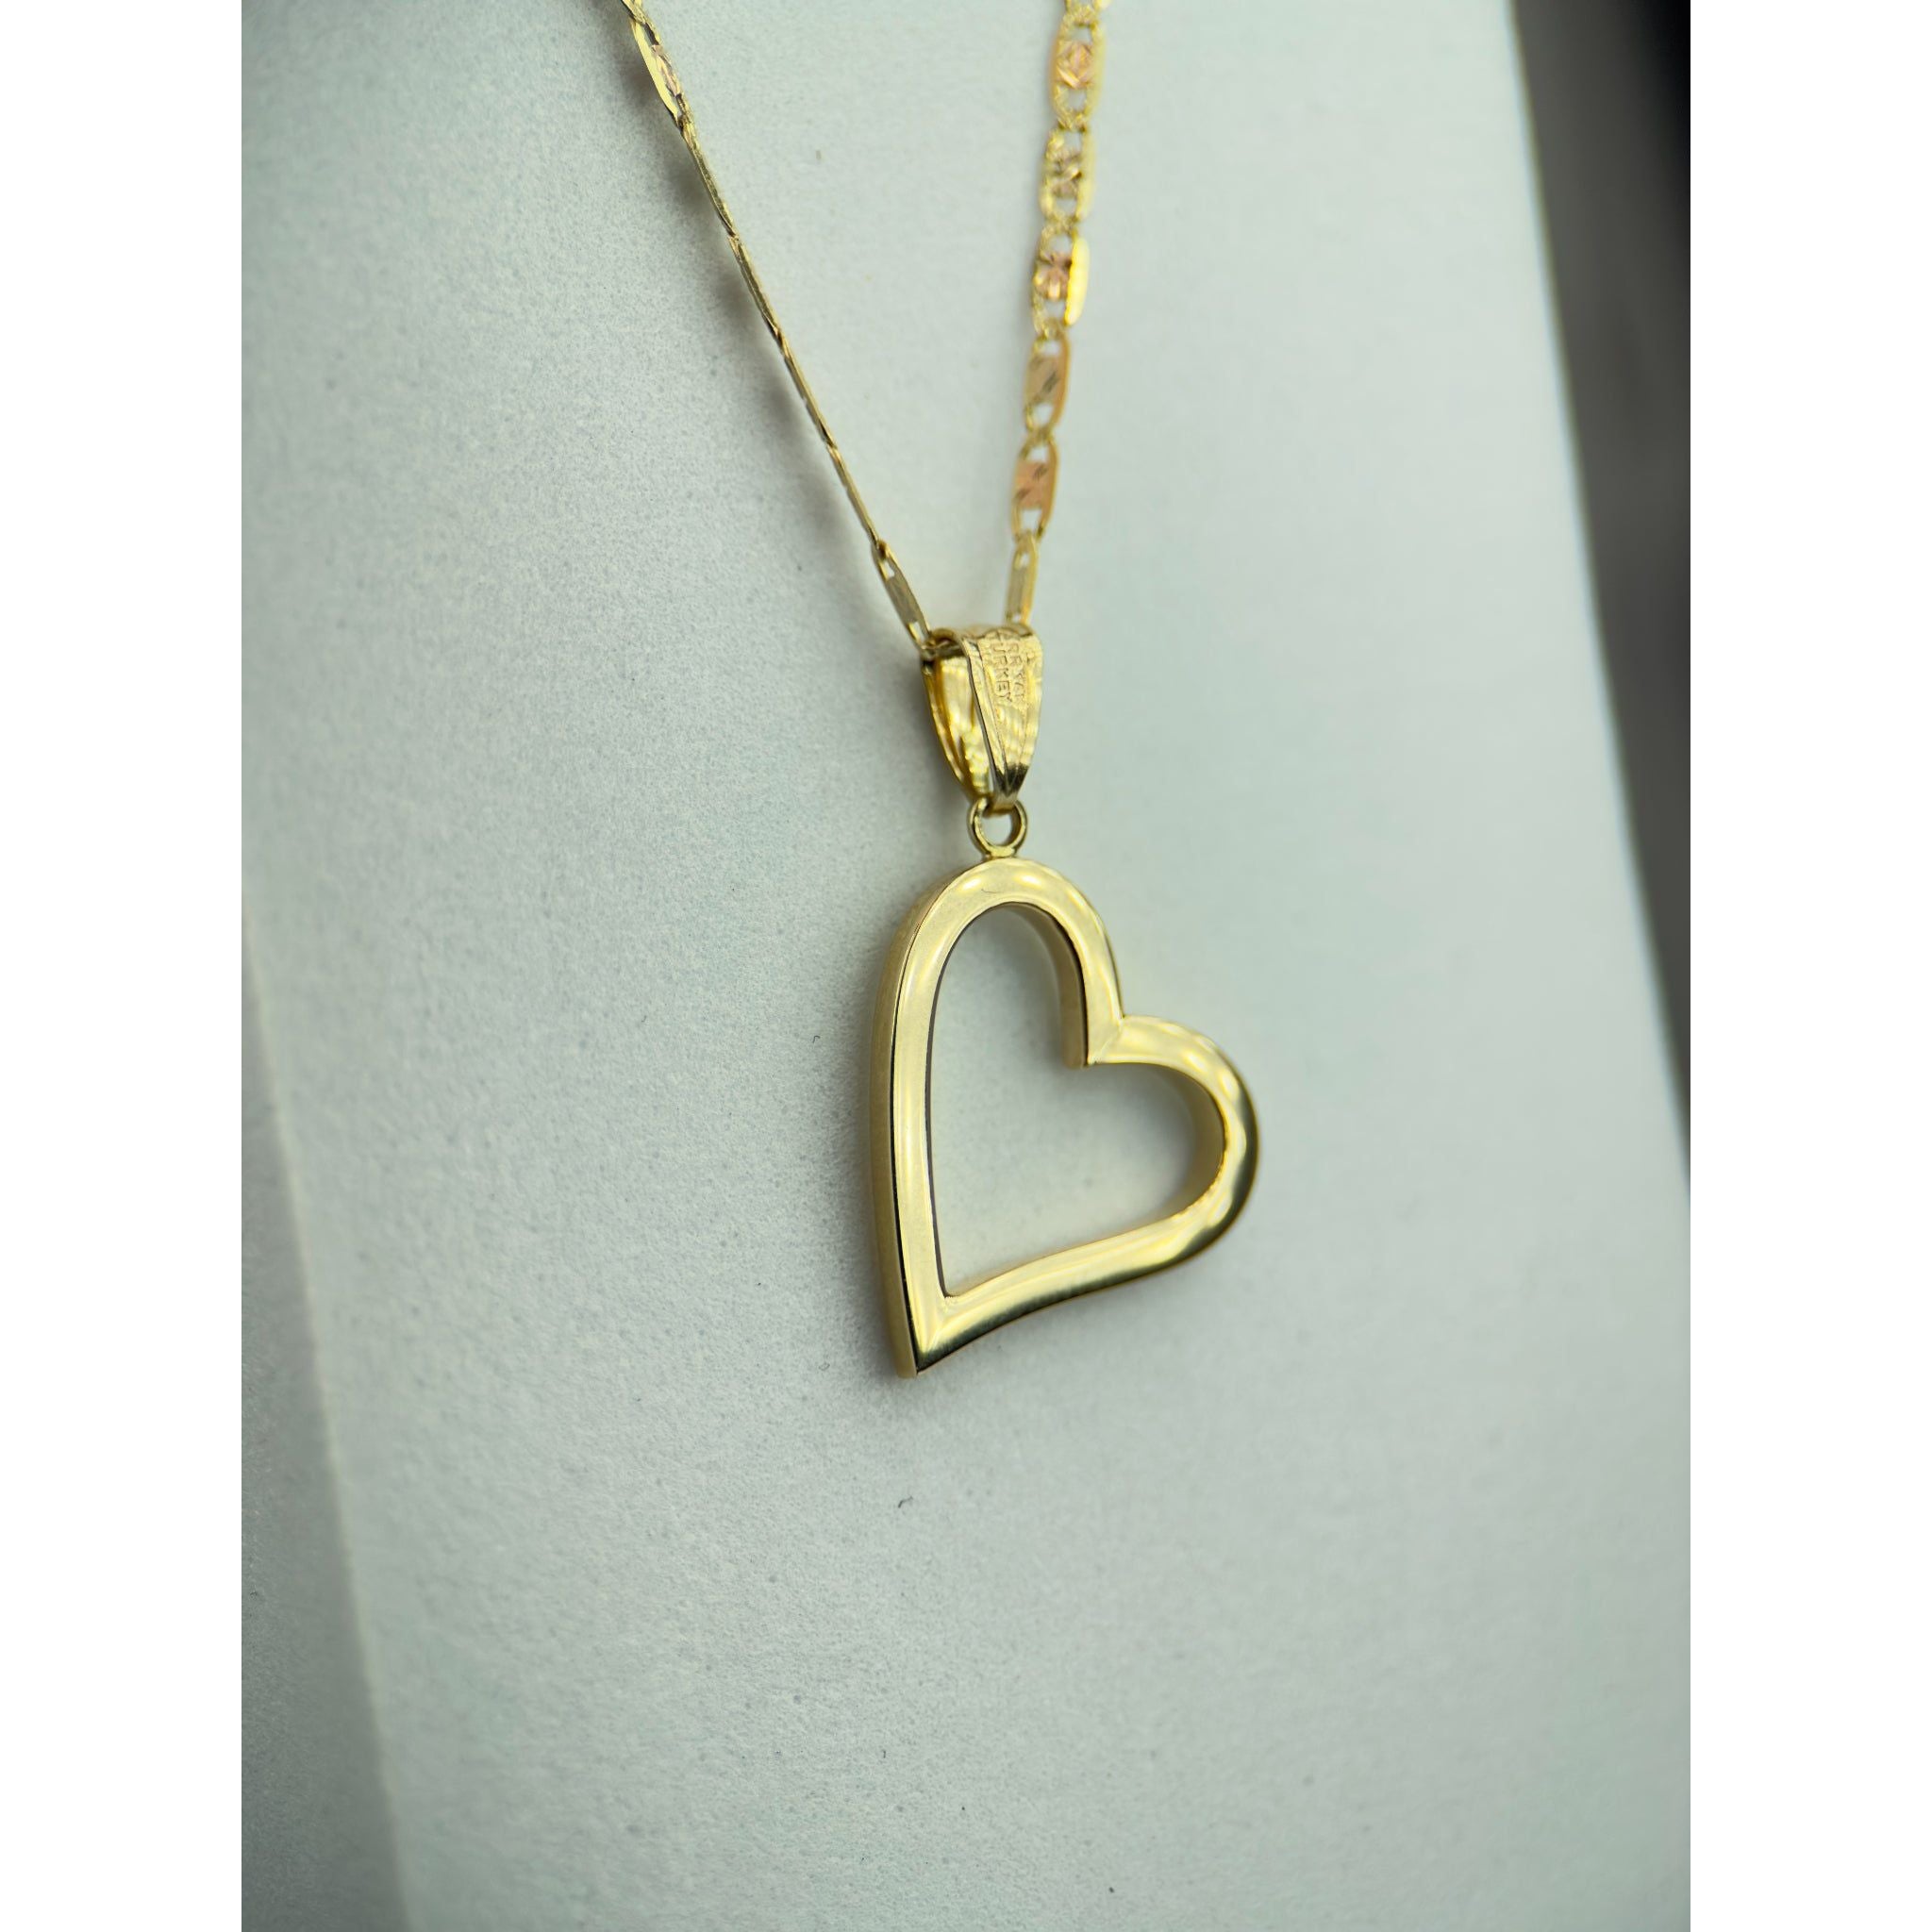 DR1924 - 14K Yellow Gold,14K Rose Gold - Gold Chain & Charm - 14K Gold Open Heart